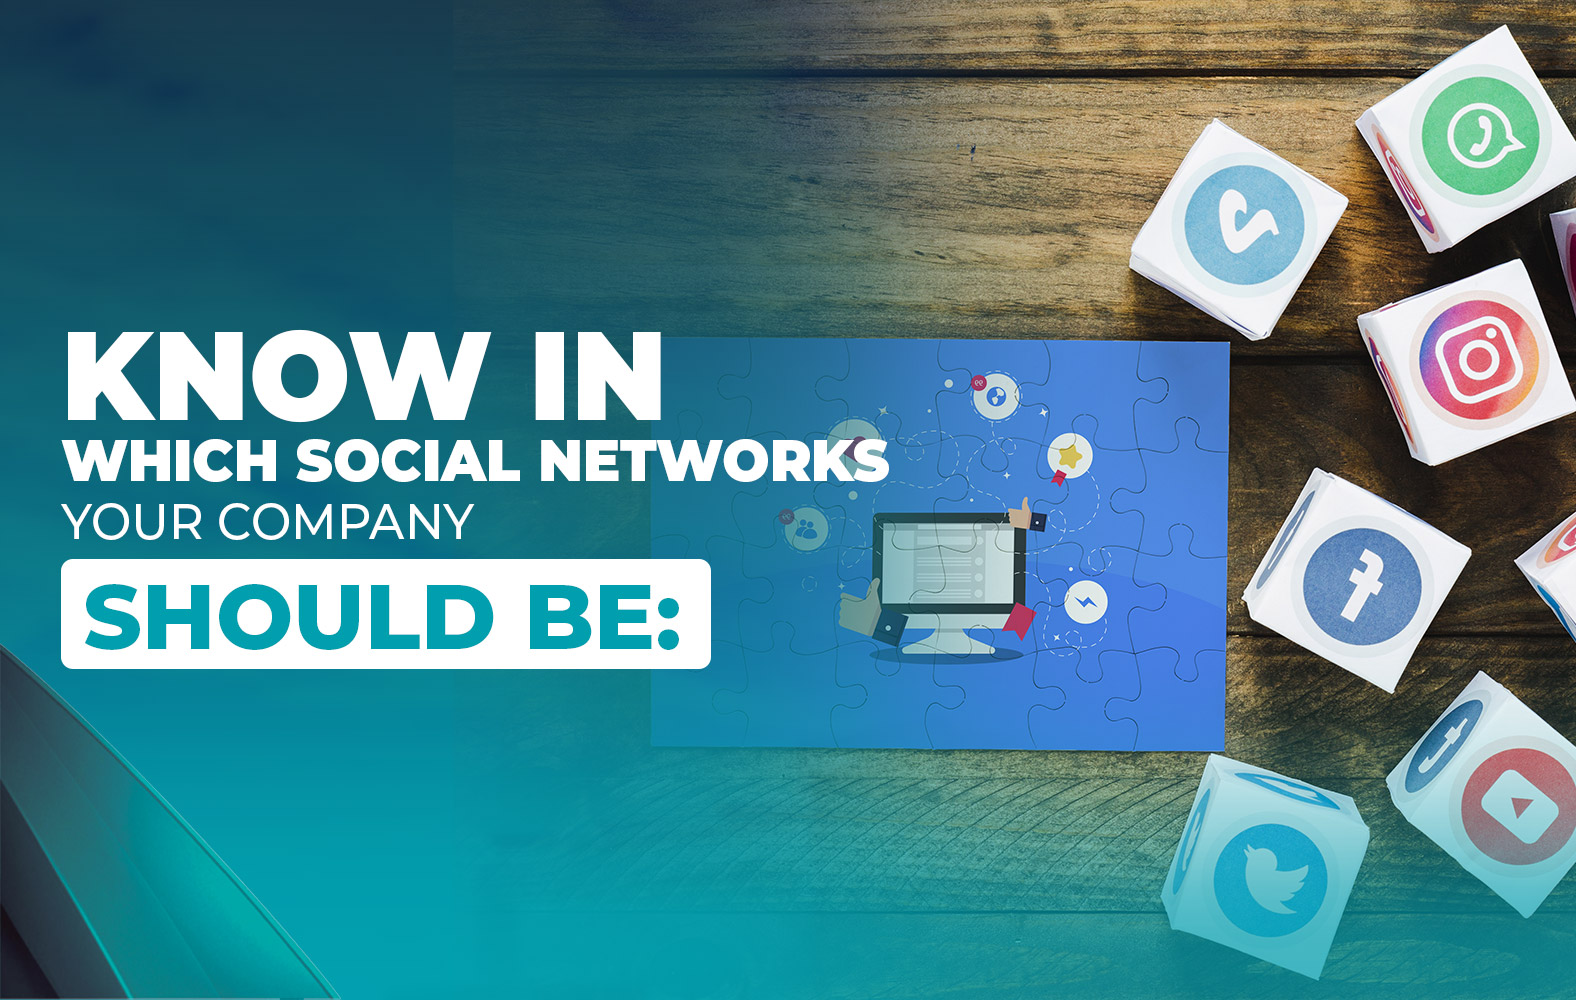 KNOW IN WHICH SOCIAL NETWORKS YOUR COMPANY SHOULD BE: